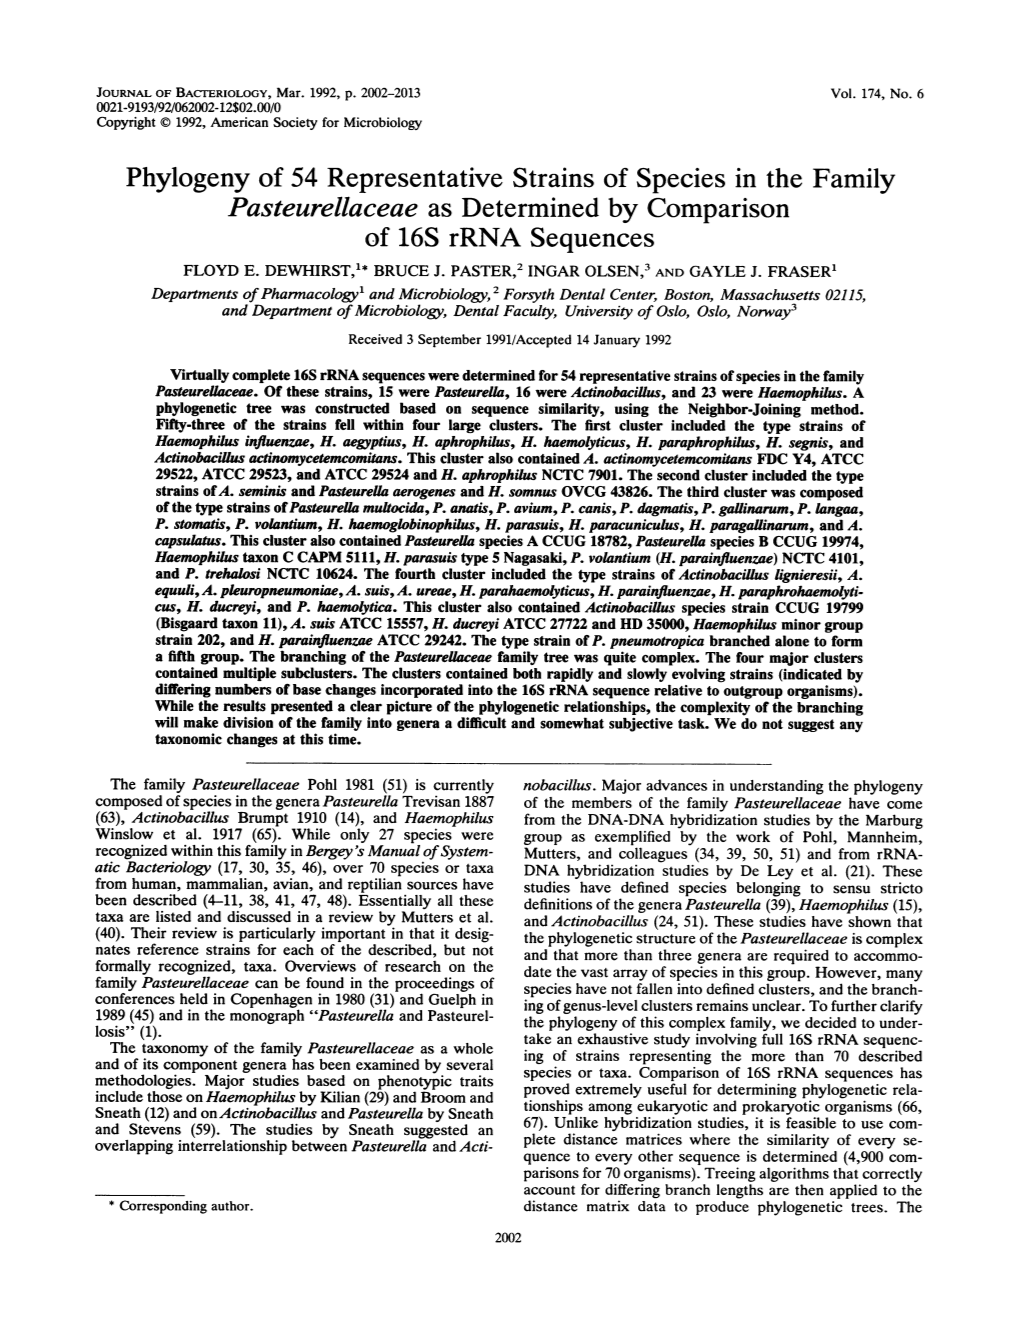 Phylogeny of 54 Representative Strains of Species in the Family Pasteurellaceae As Determined by Comparison of 16S Rrna Sequences FLOYD E